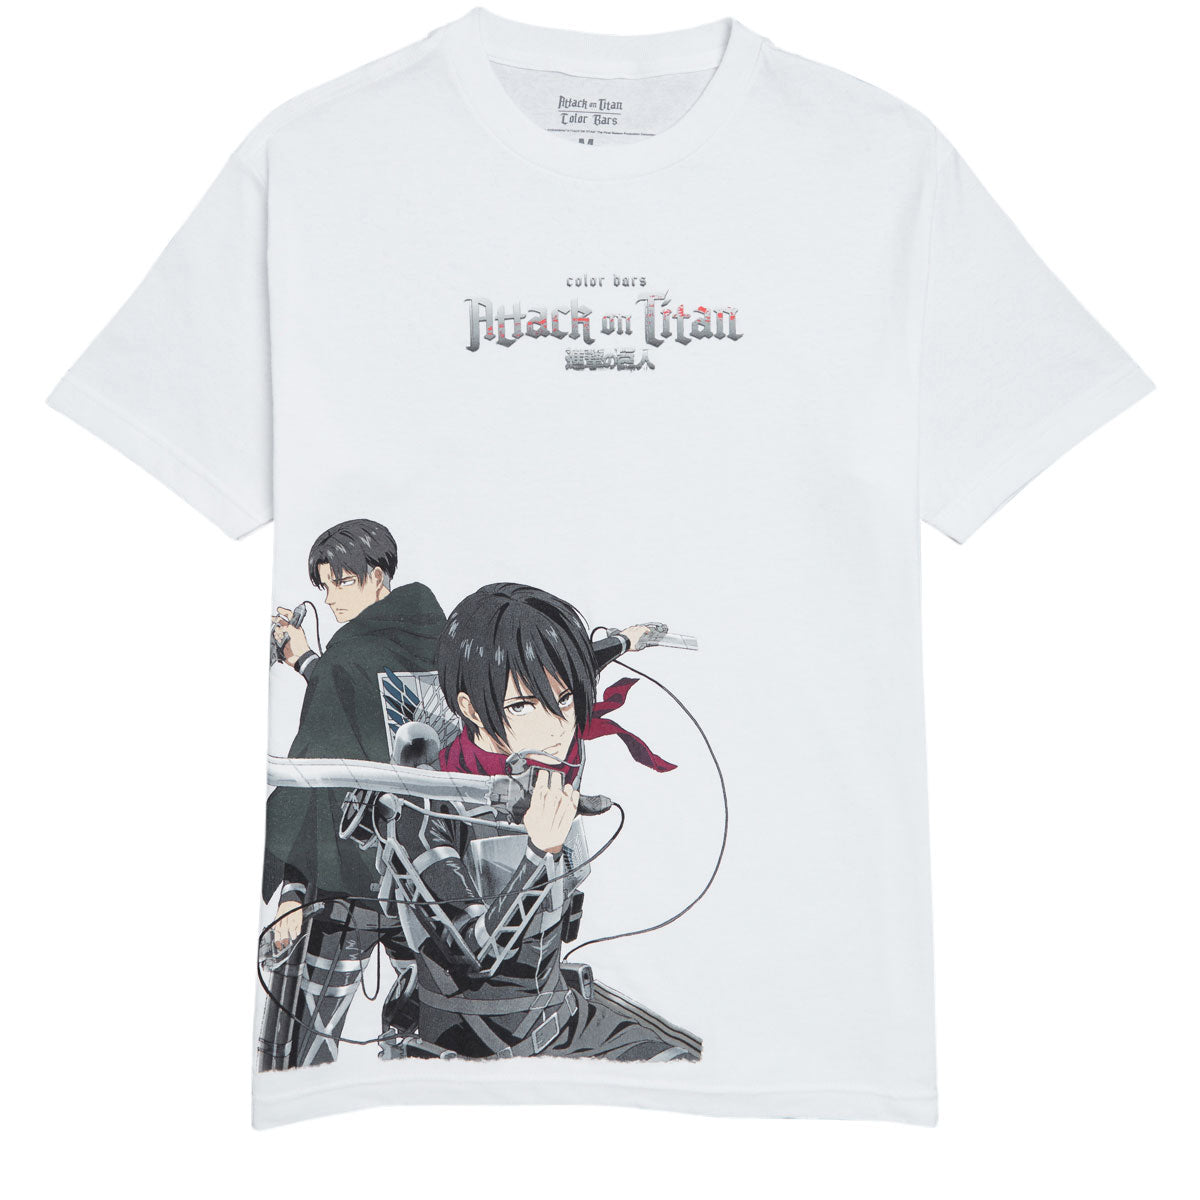 Color Bars x Attack on Titan Back to Back T-Shirt - White image 1